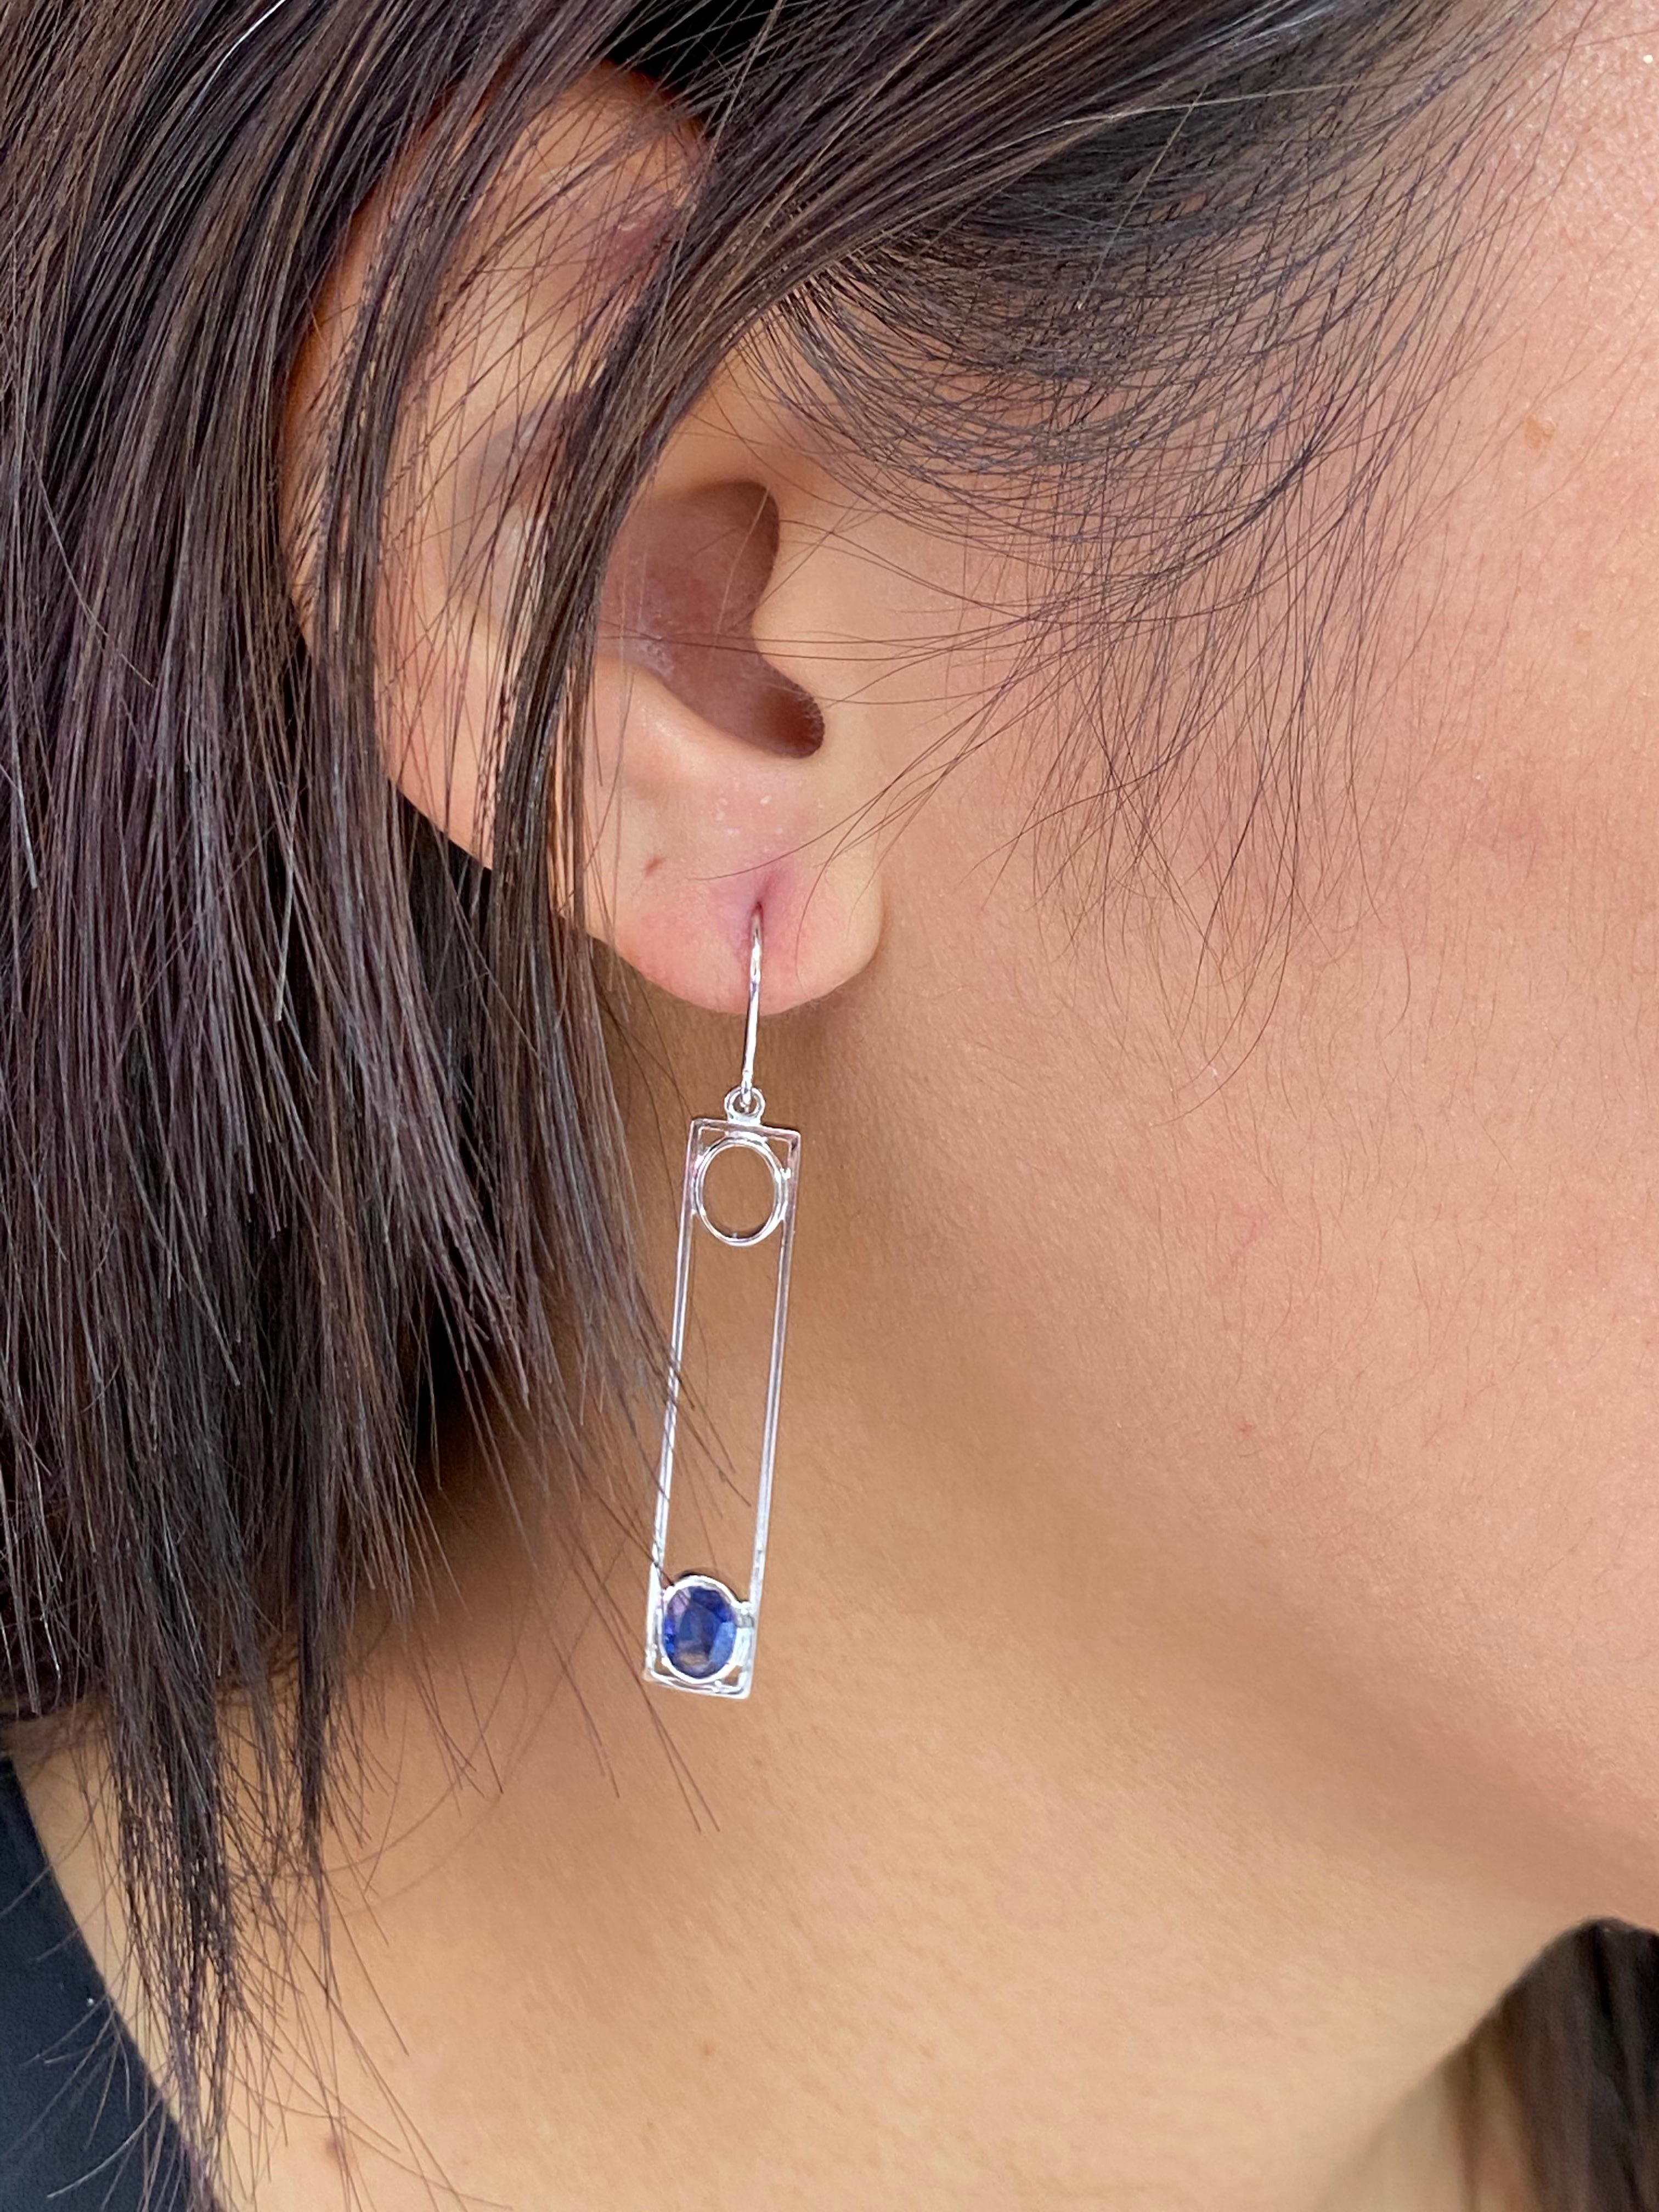 Here is a very nice pair of Sapphire drop earrings. The design is superb. The earrings are set in 18k white gold. Simple and elegant. the 2 oval shaped sapphires weight a total of 1.44cts. You can spot these drop earrings from far away. You can't